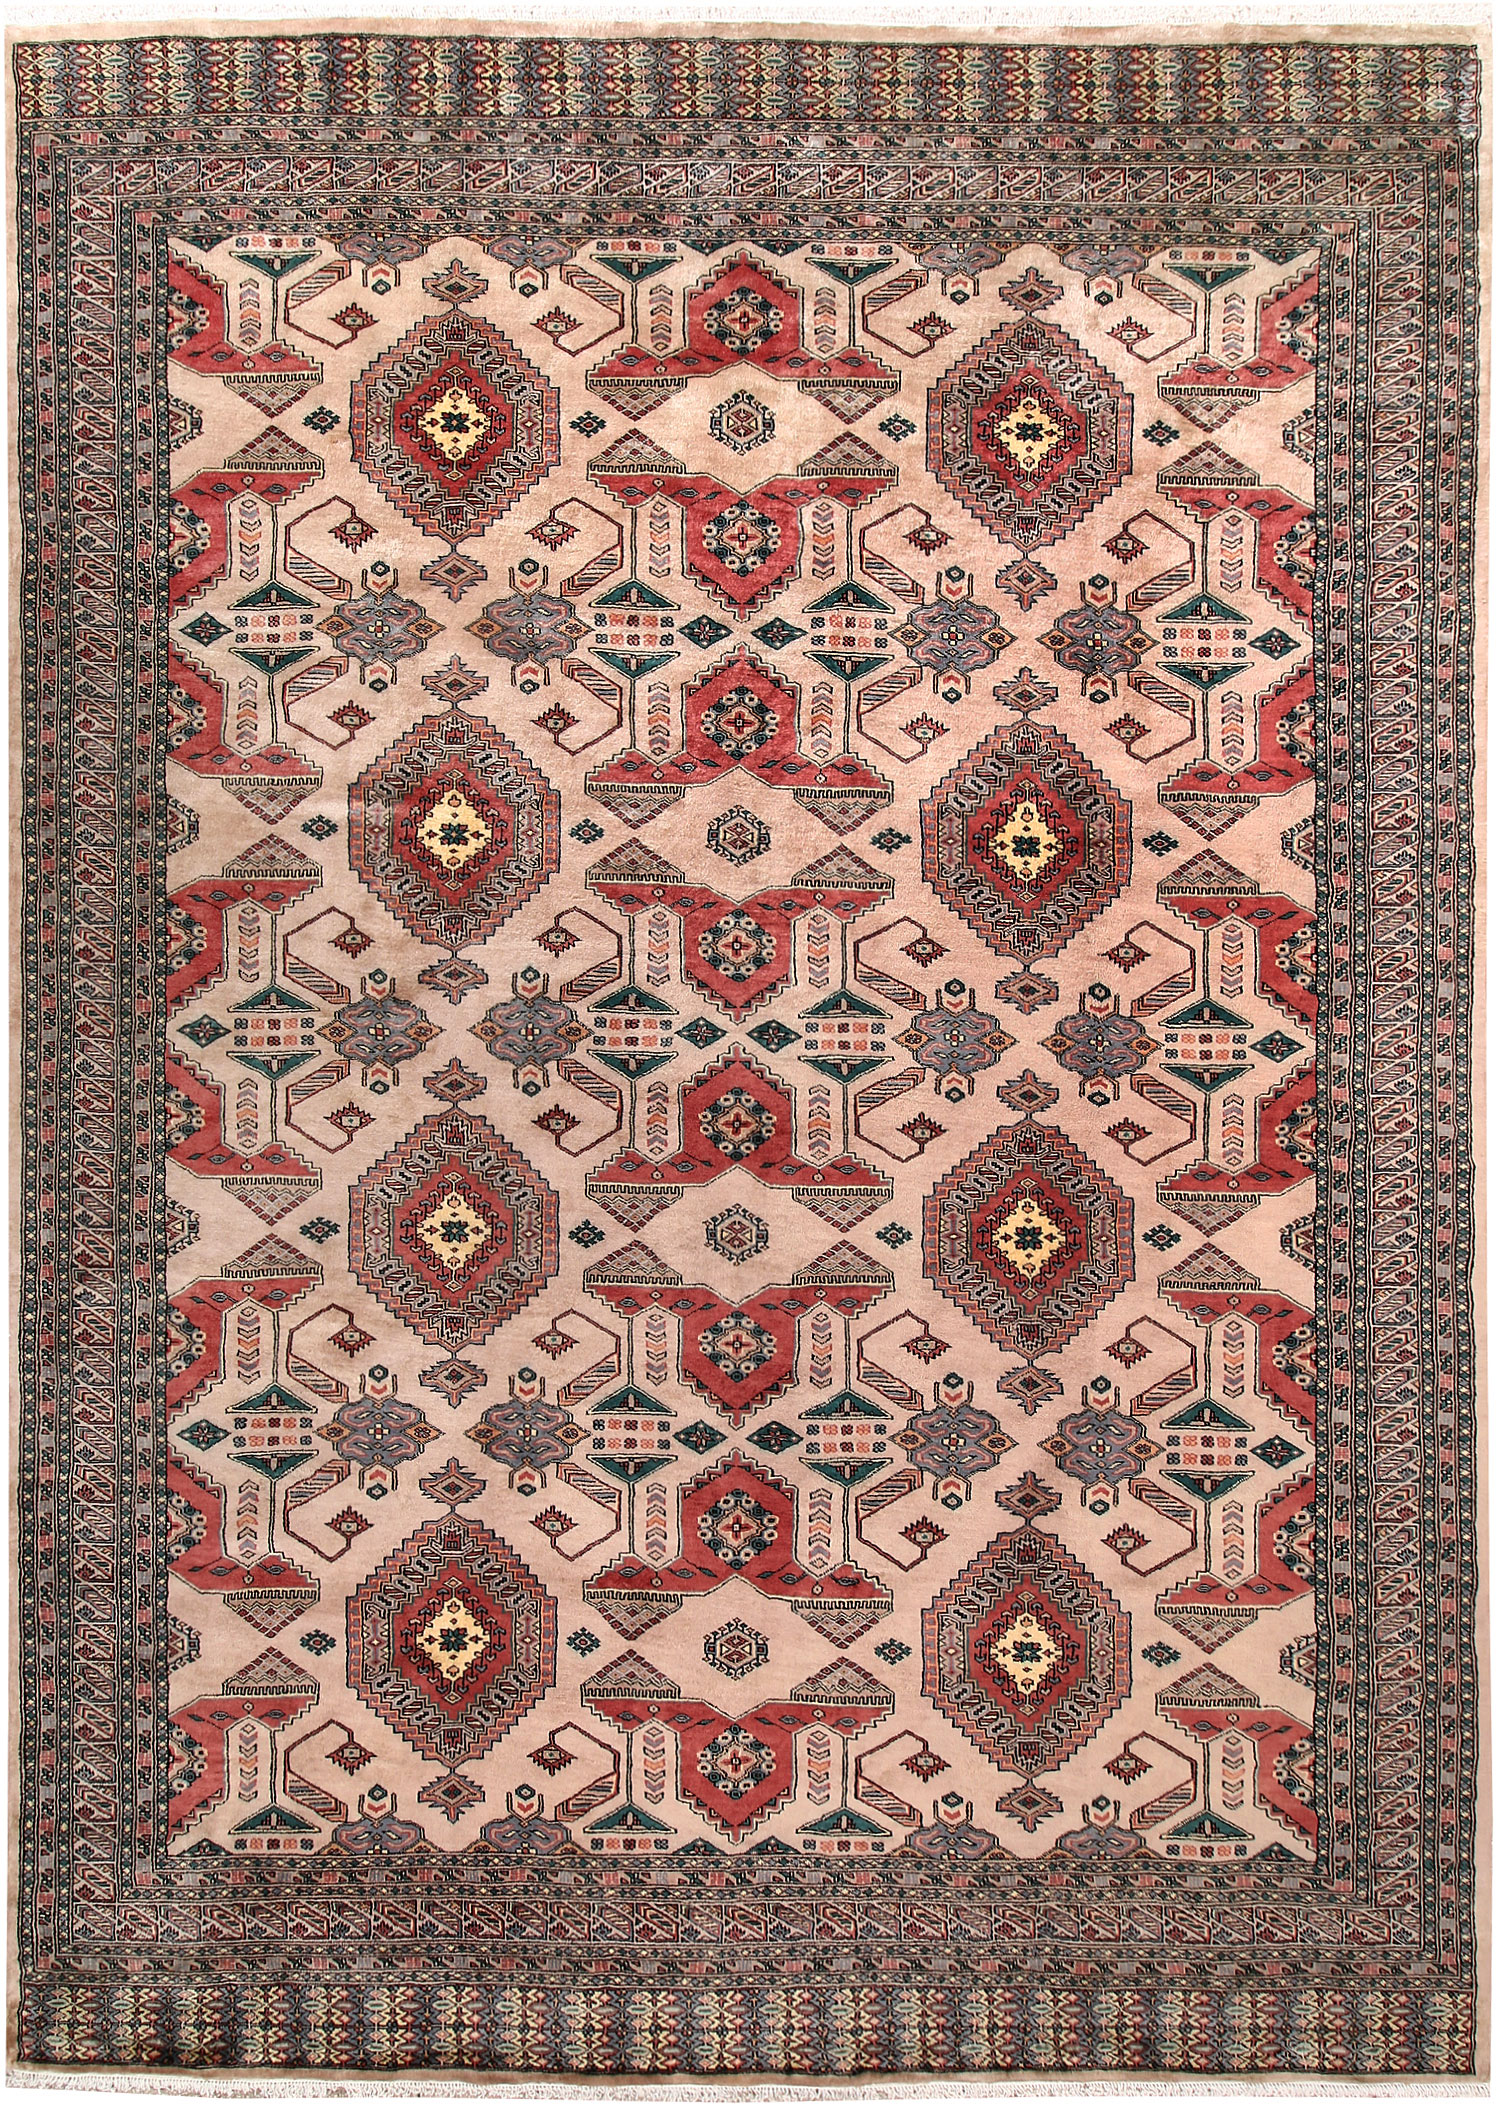 Zephyr Collection Rugs